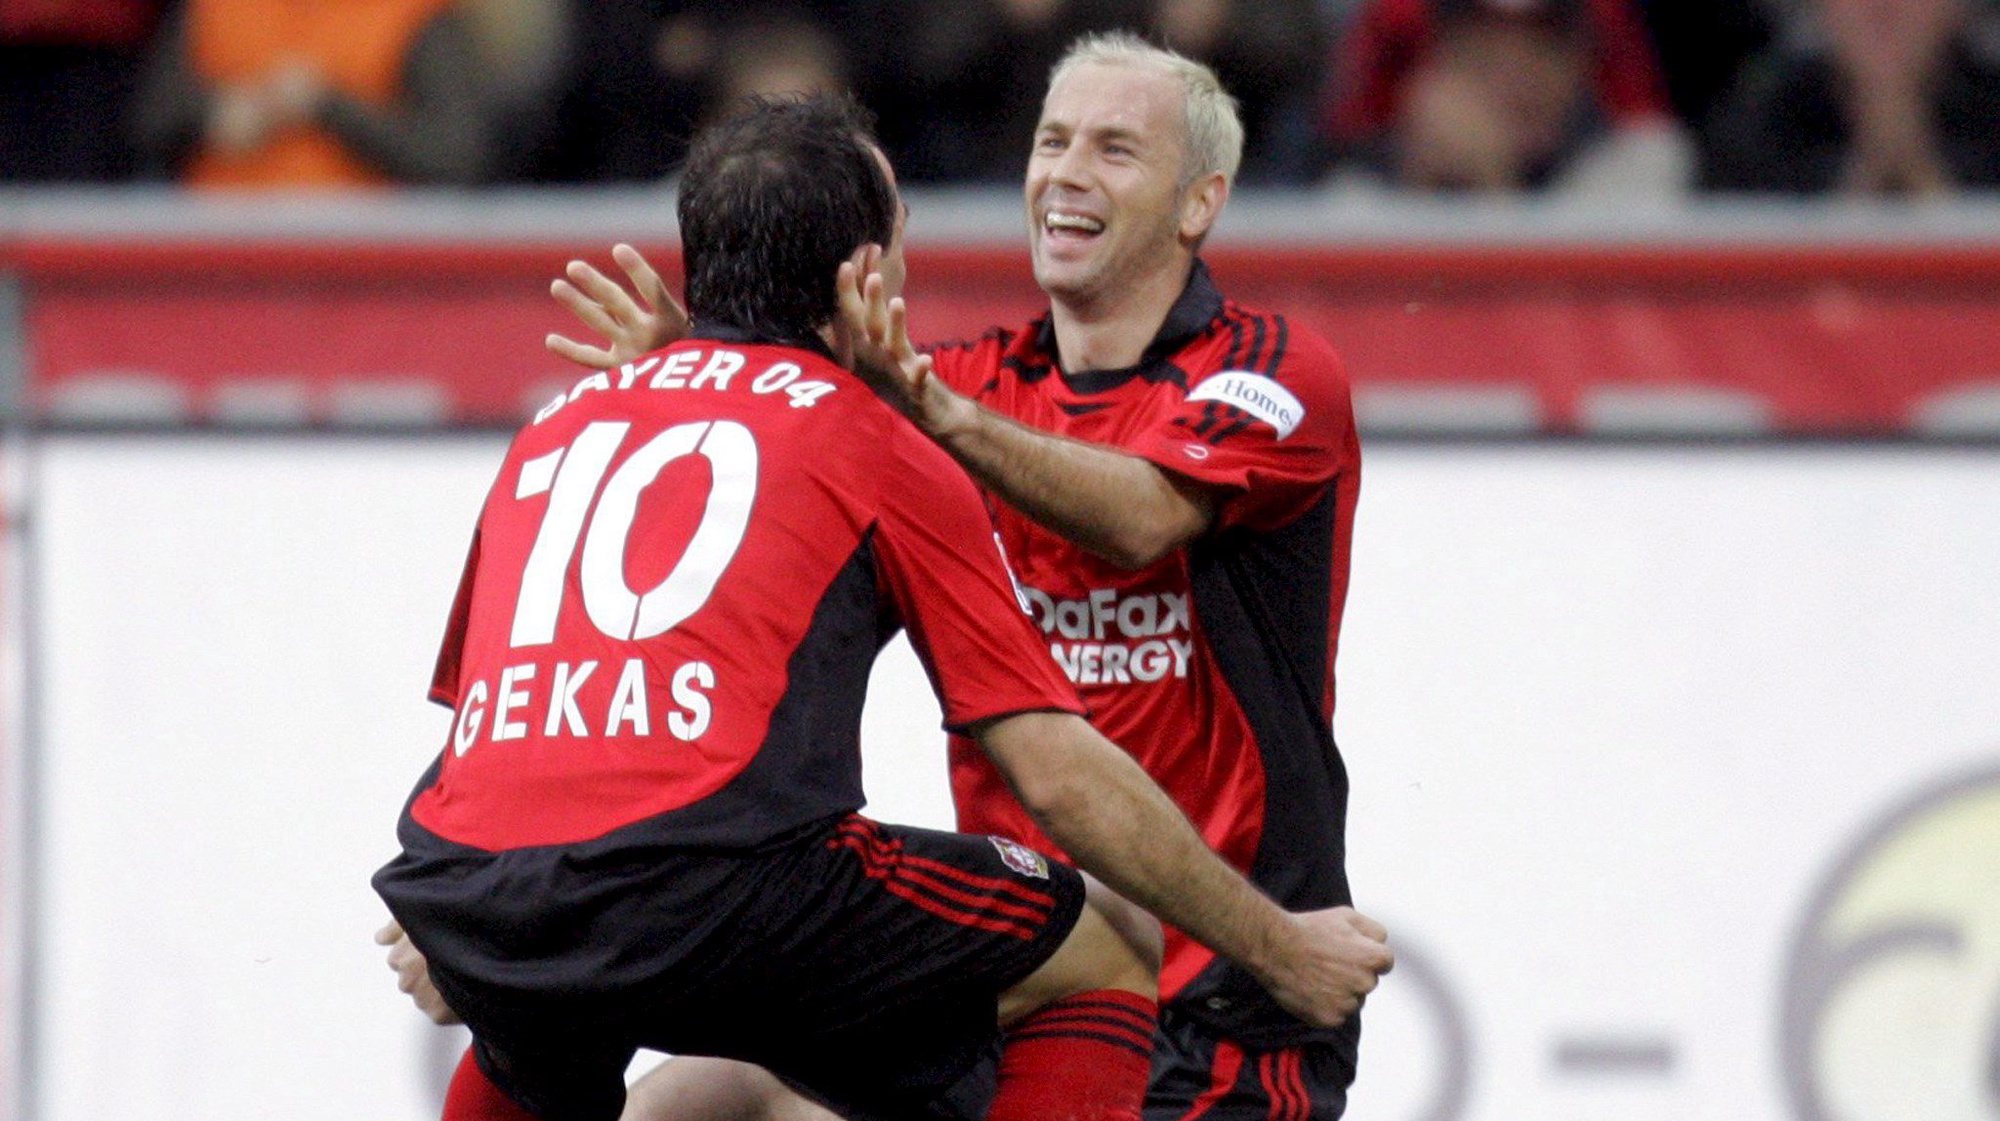 epa01163835 Greek striker Theofanis Gekas (L) of Bayer Leverkusen celebrates with his Bosnian team-mate Sergej Barbarez after scoring his team&#039;s second goal against Arminia Bielefeld during their German Bundesliga soccer match in Leverkusen, Germany, 03 November 2007. 

(ATTENTION: BLOCKING PERIOD! The DFL permits the further utilisation of the pictures in IPTV, mobile services and other new technologies no earlier than two hours after the end of the match. The publication and further utilisation in the internet during the match is restricted to six pictures per match only.)  EPA/BERND THISSEN